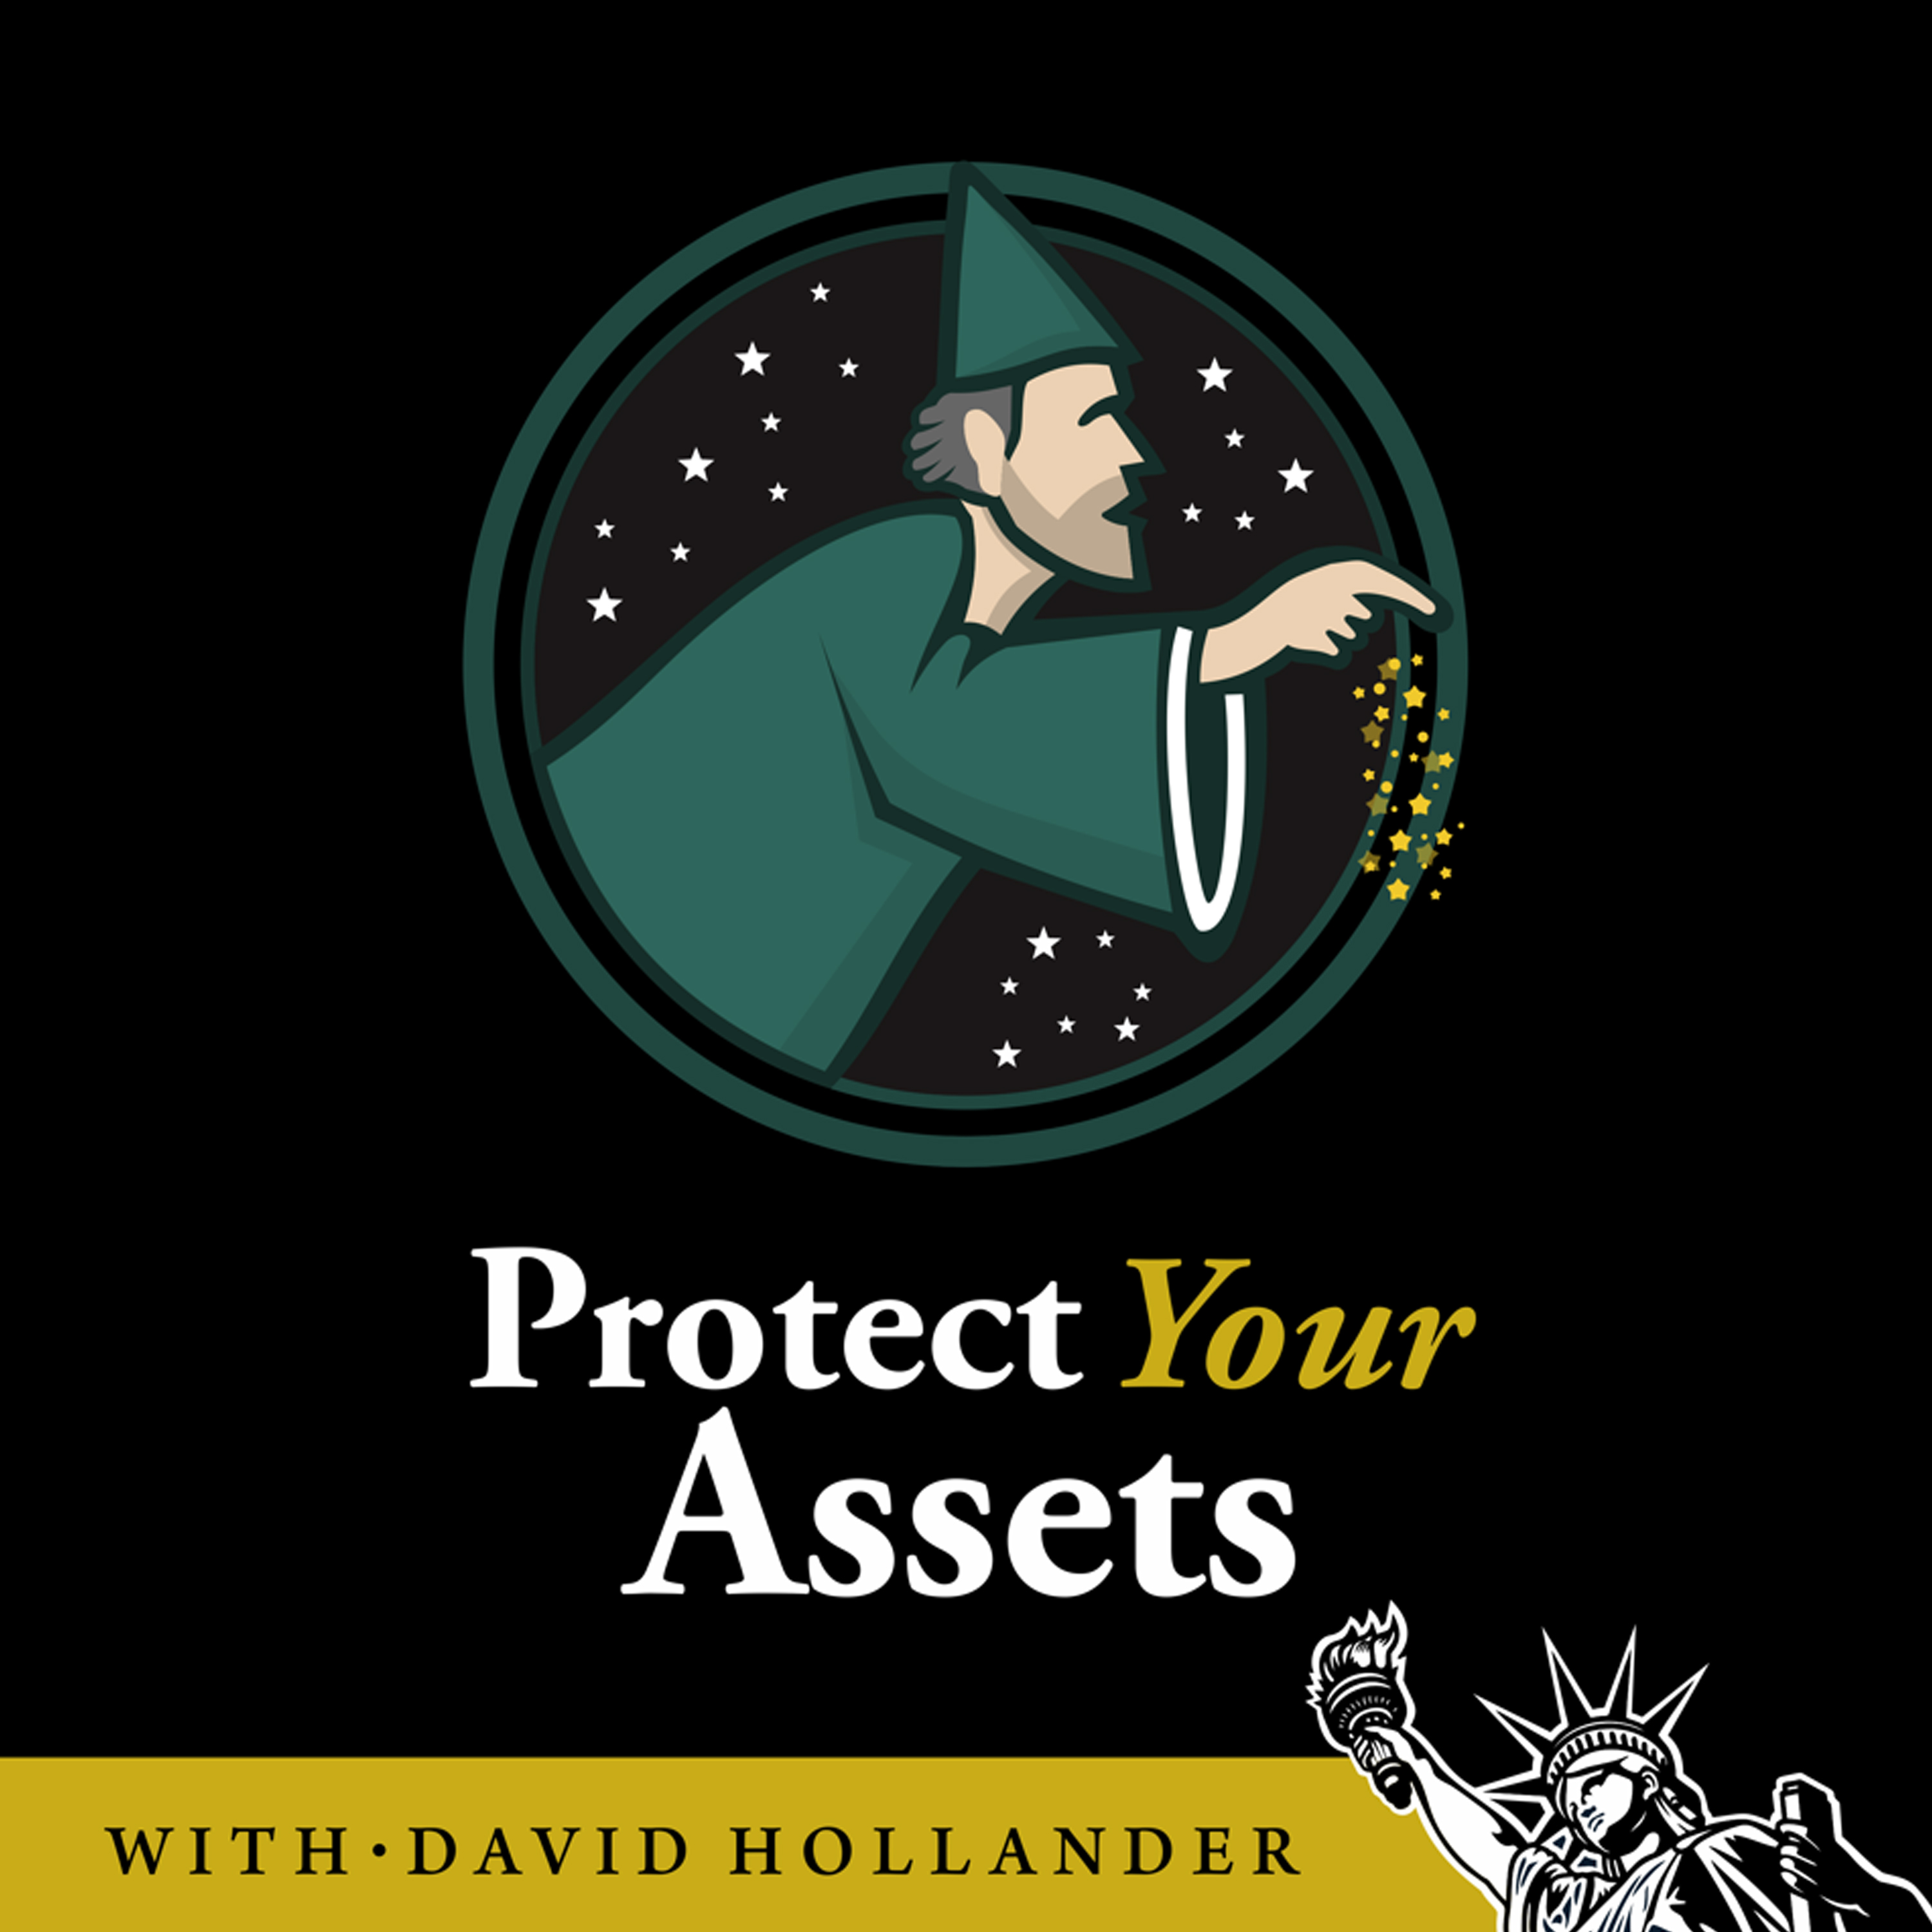 12-1 How To Play Defense With Your Retirement Portfolio